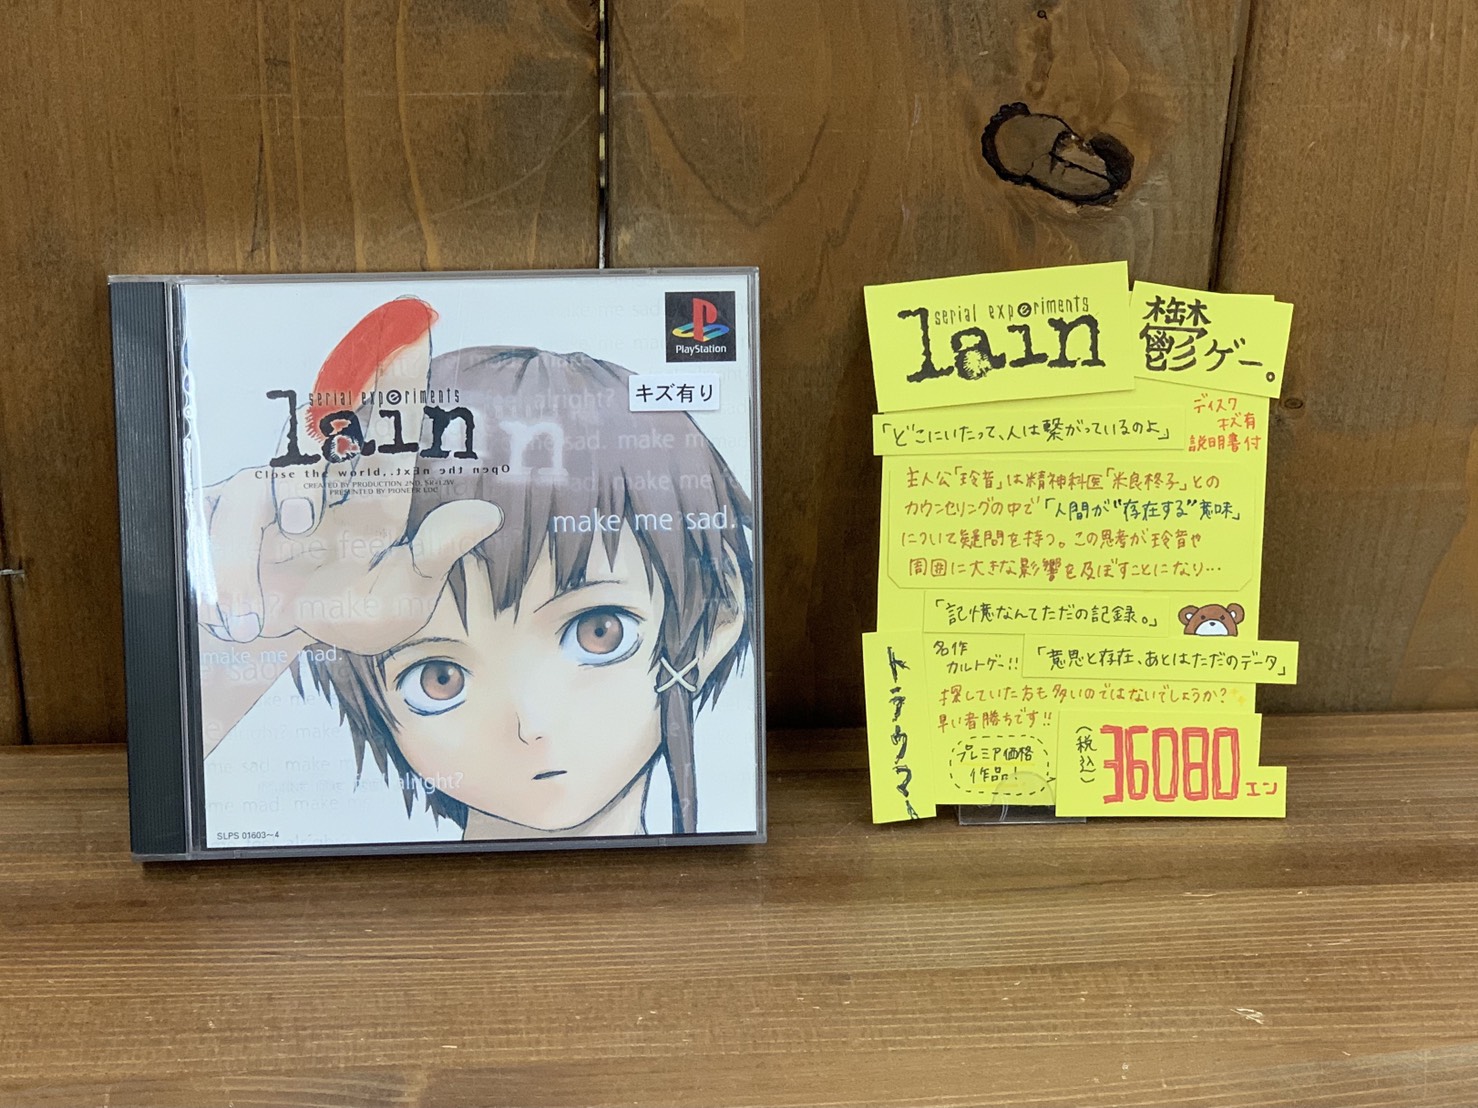 8/29☆〈PSソフト ｢serial experiments lain｣〉入荷しました！☆ | マンガ倉庫 富山店